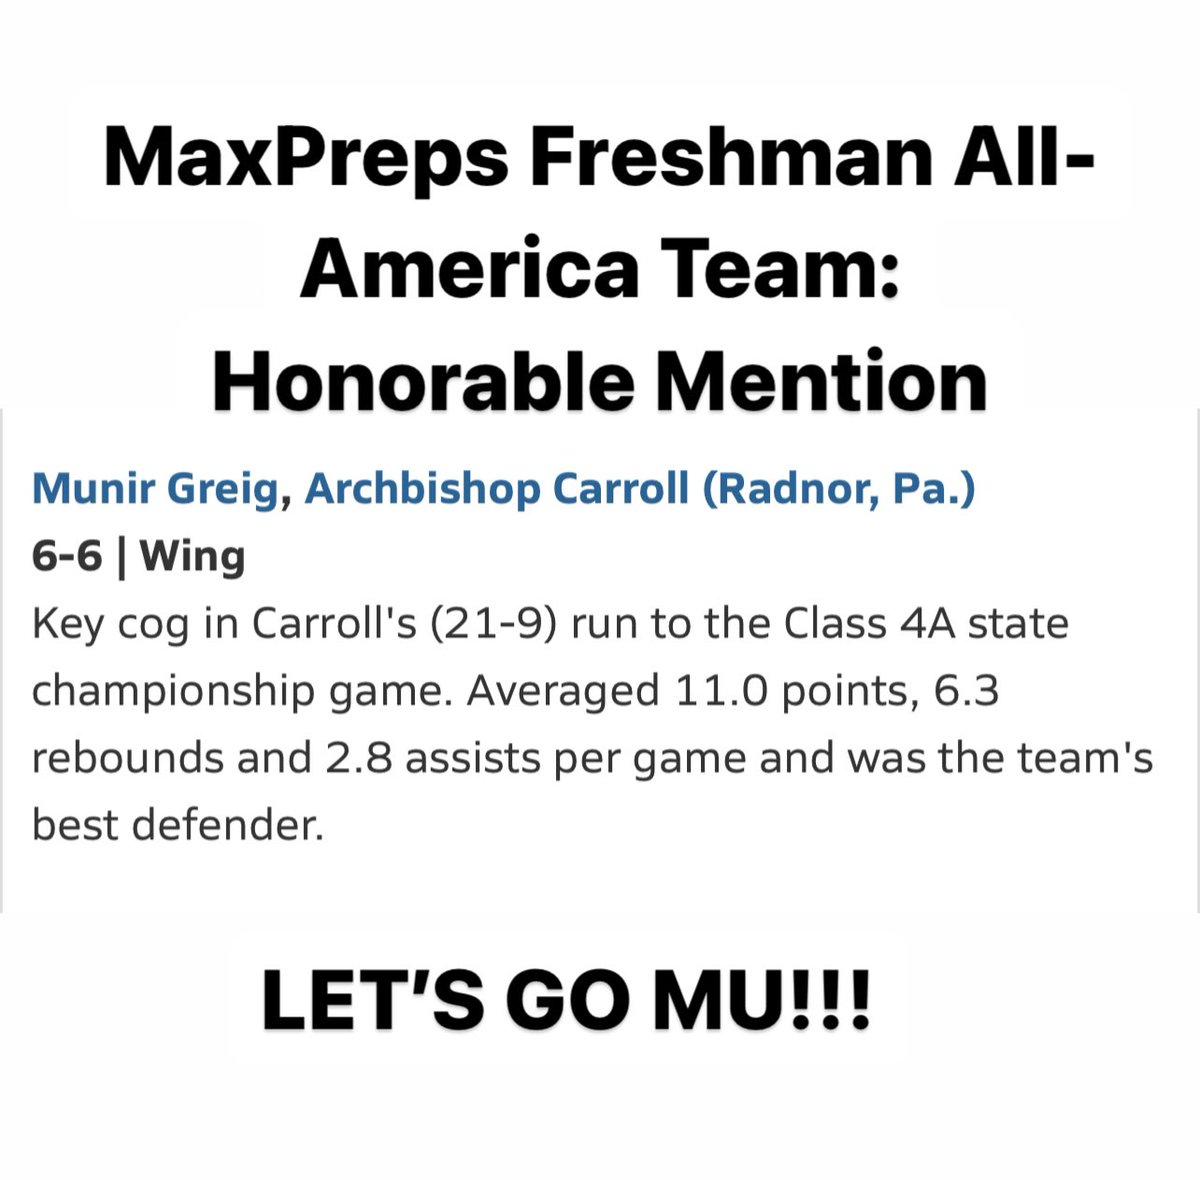 @MaxPreps Freshman All American Honorable Mention!!!! 🫡! Couldn’t be any prouder of you Mu!! @richflanagan33 @carroll_hoops @new_scholars @Booksandbasket1 @pcl_hoops @ACHSathletics